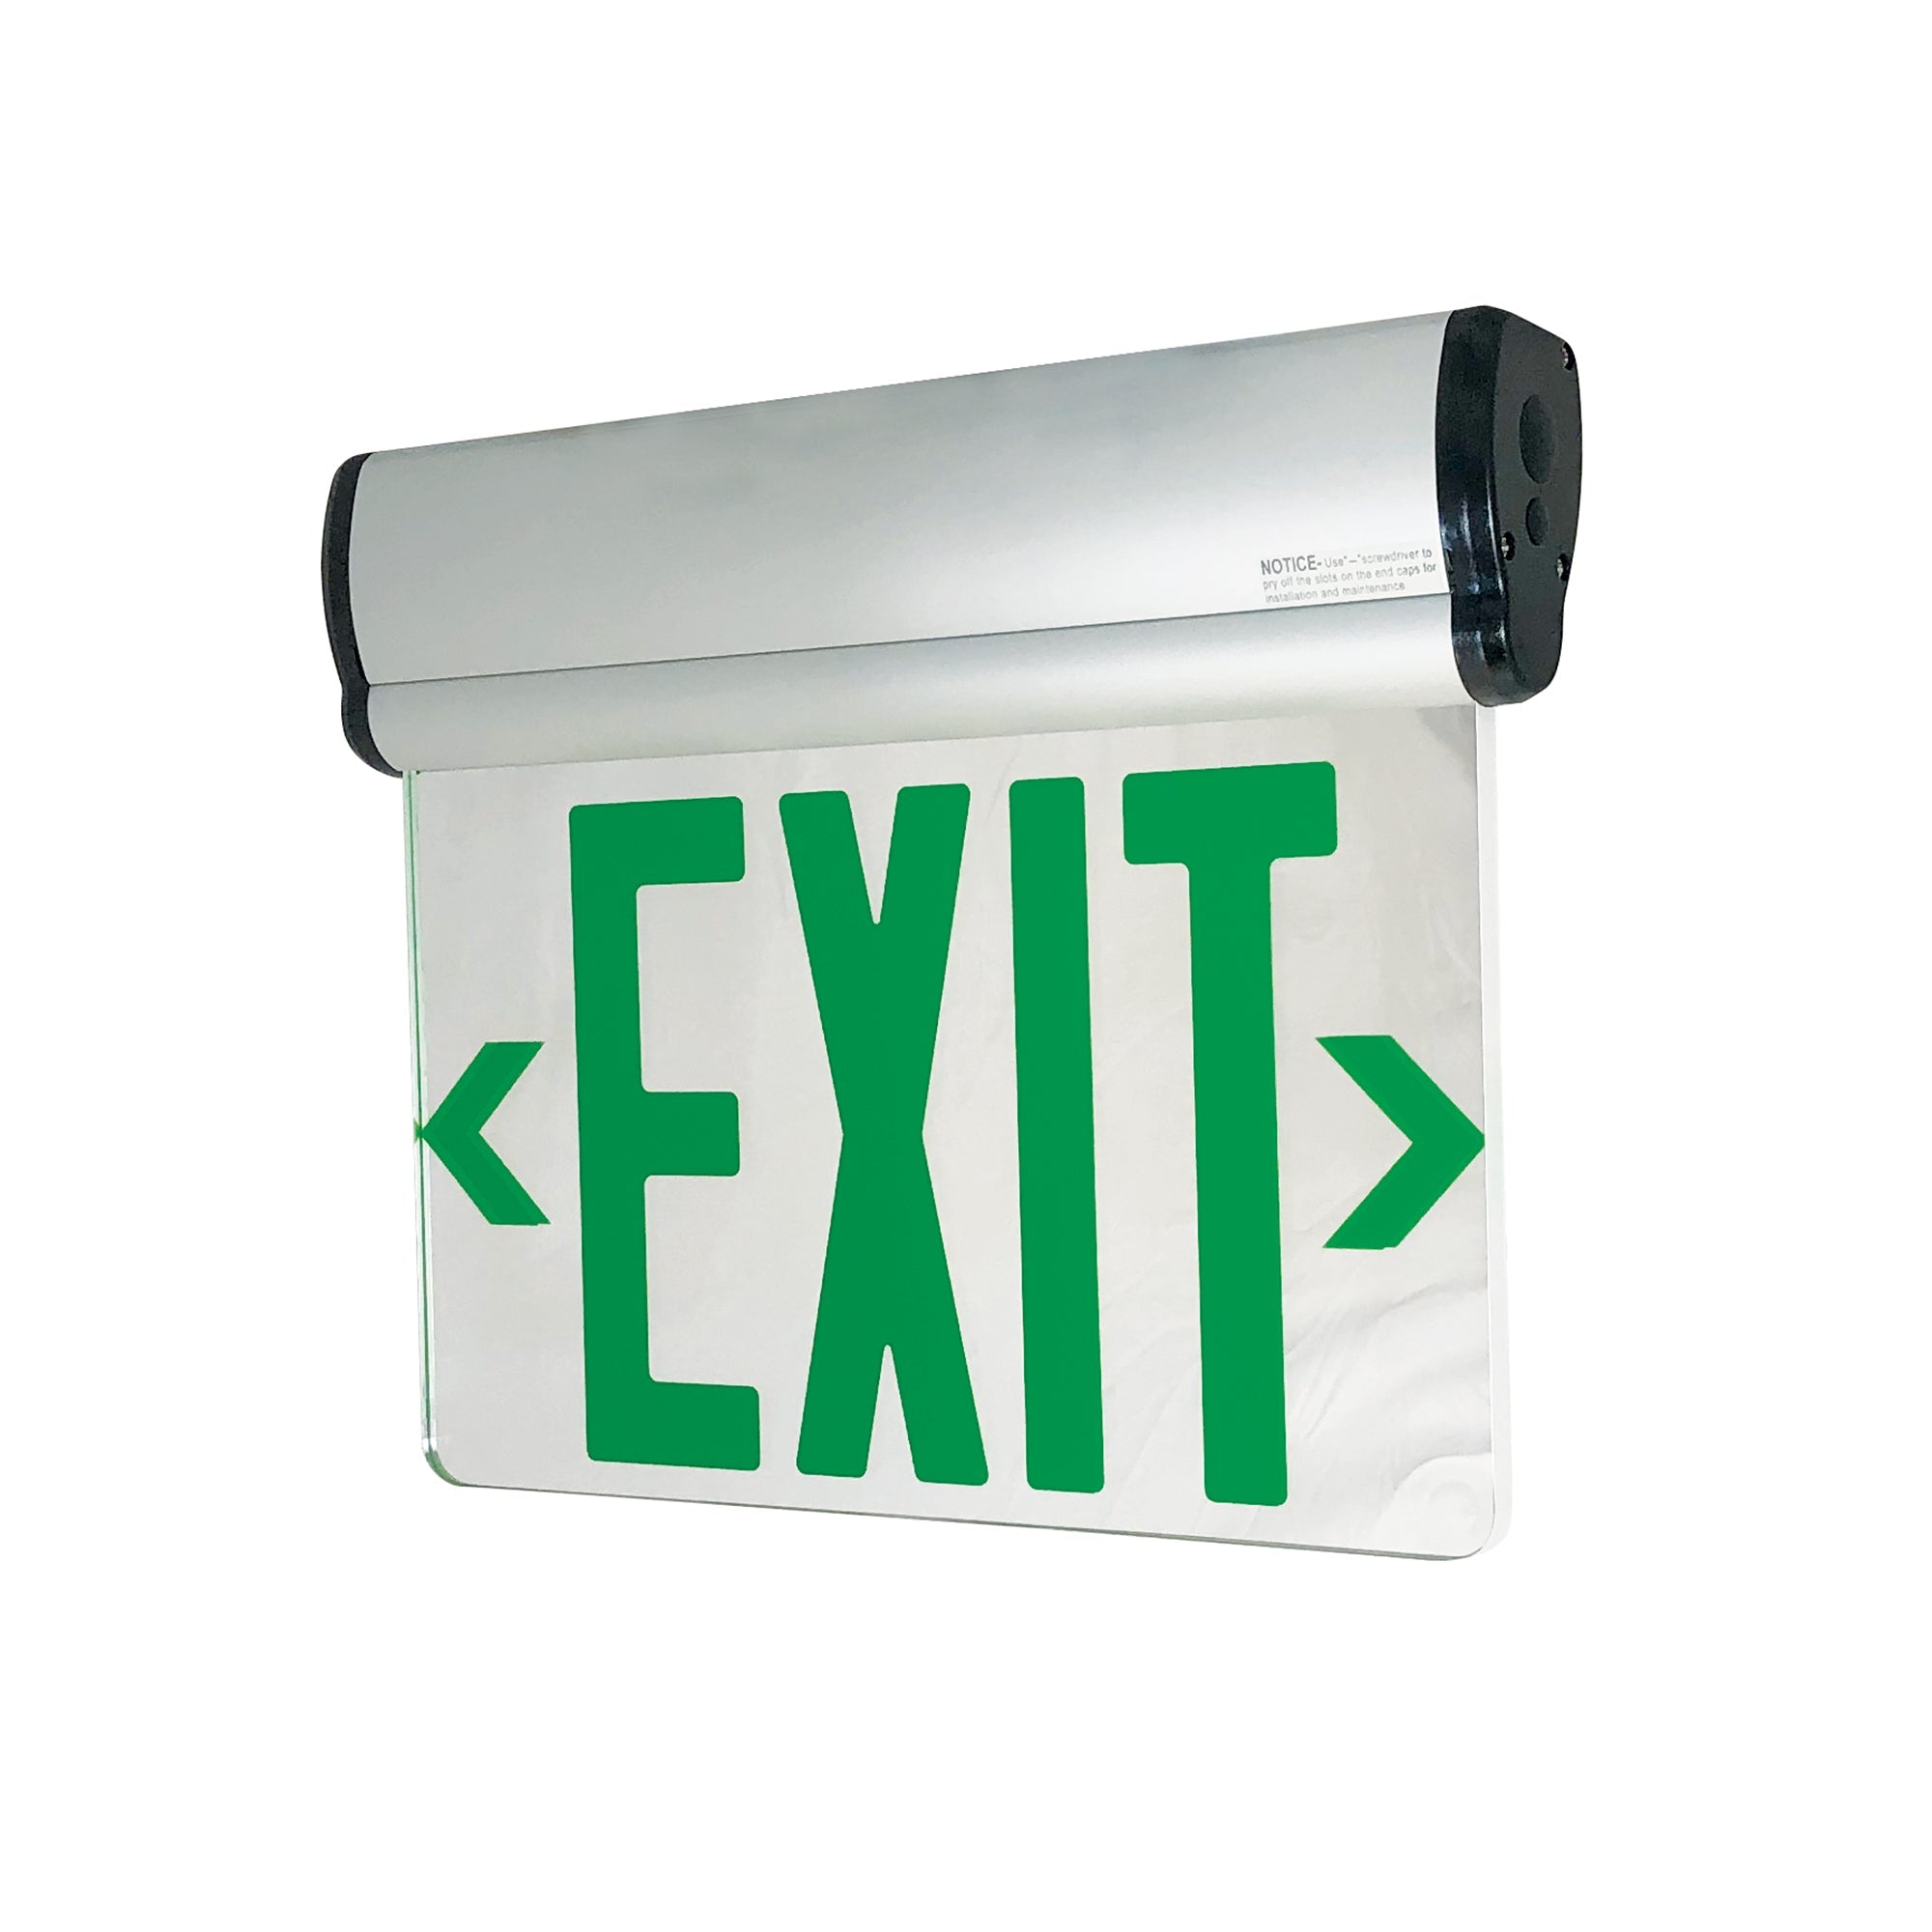 Nora Lighting NX-812-LEDG2MA - Exit / Emergency - Surface Adjustable LED Edge-Lit Exit Sign, Battery Backup, 6 Inch Green Letters, Double Face / Mirrored Acrylic, Aluminum Housing